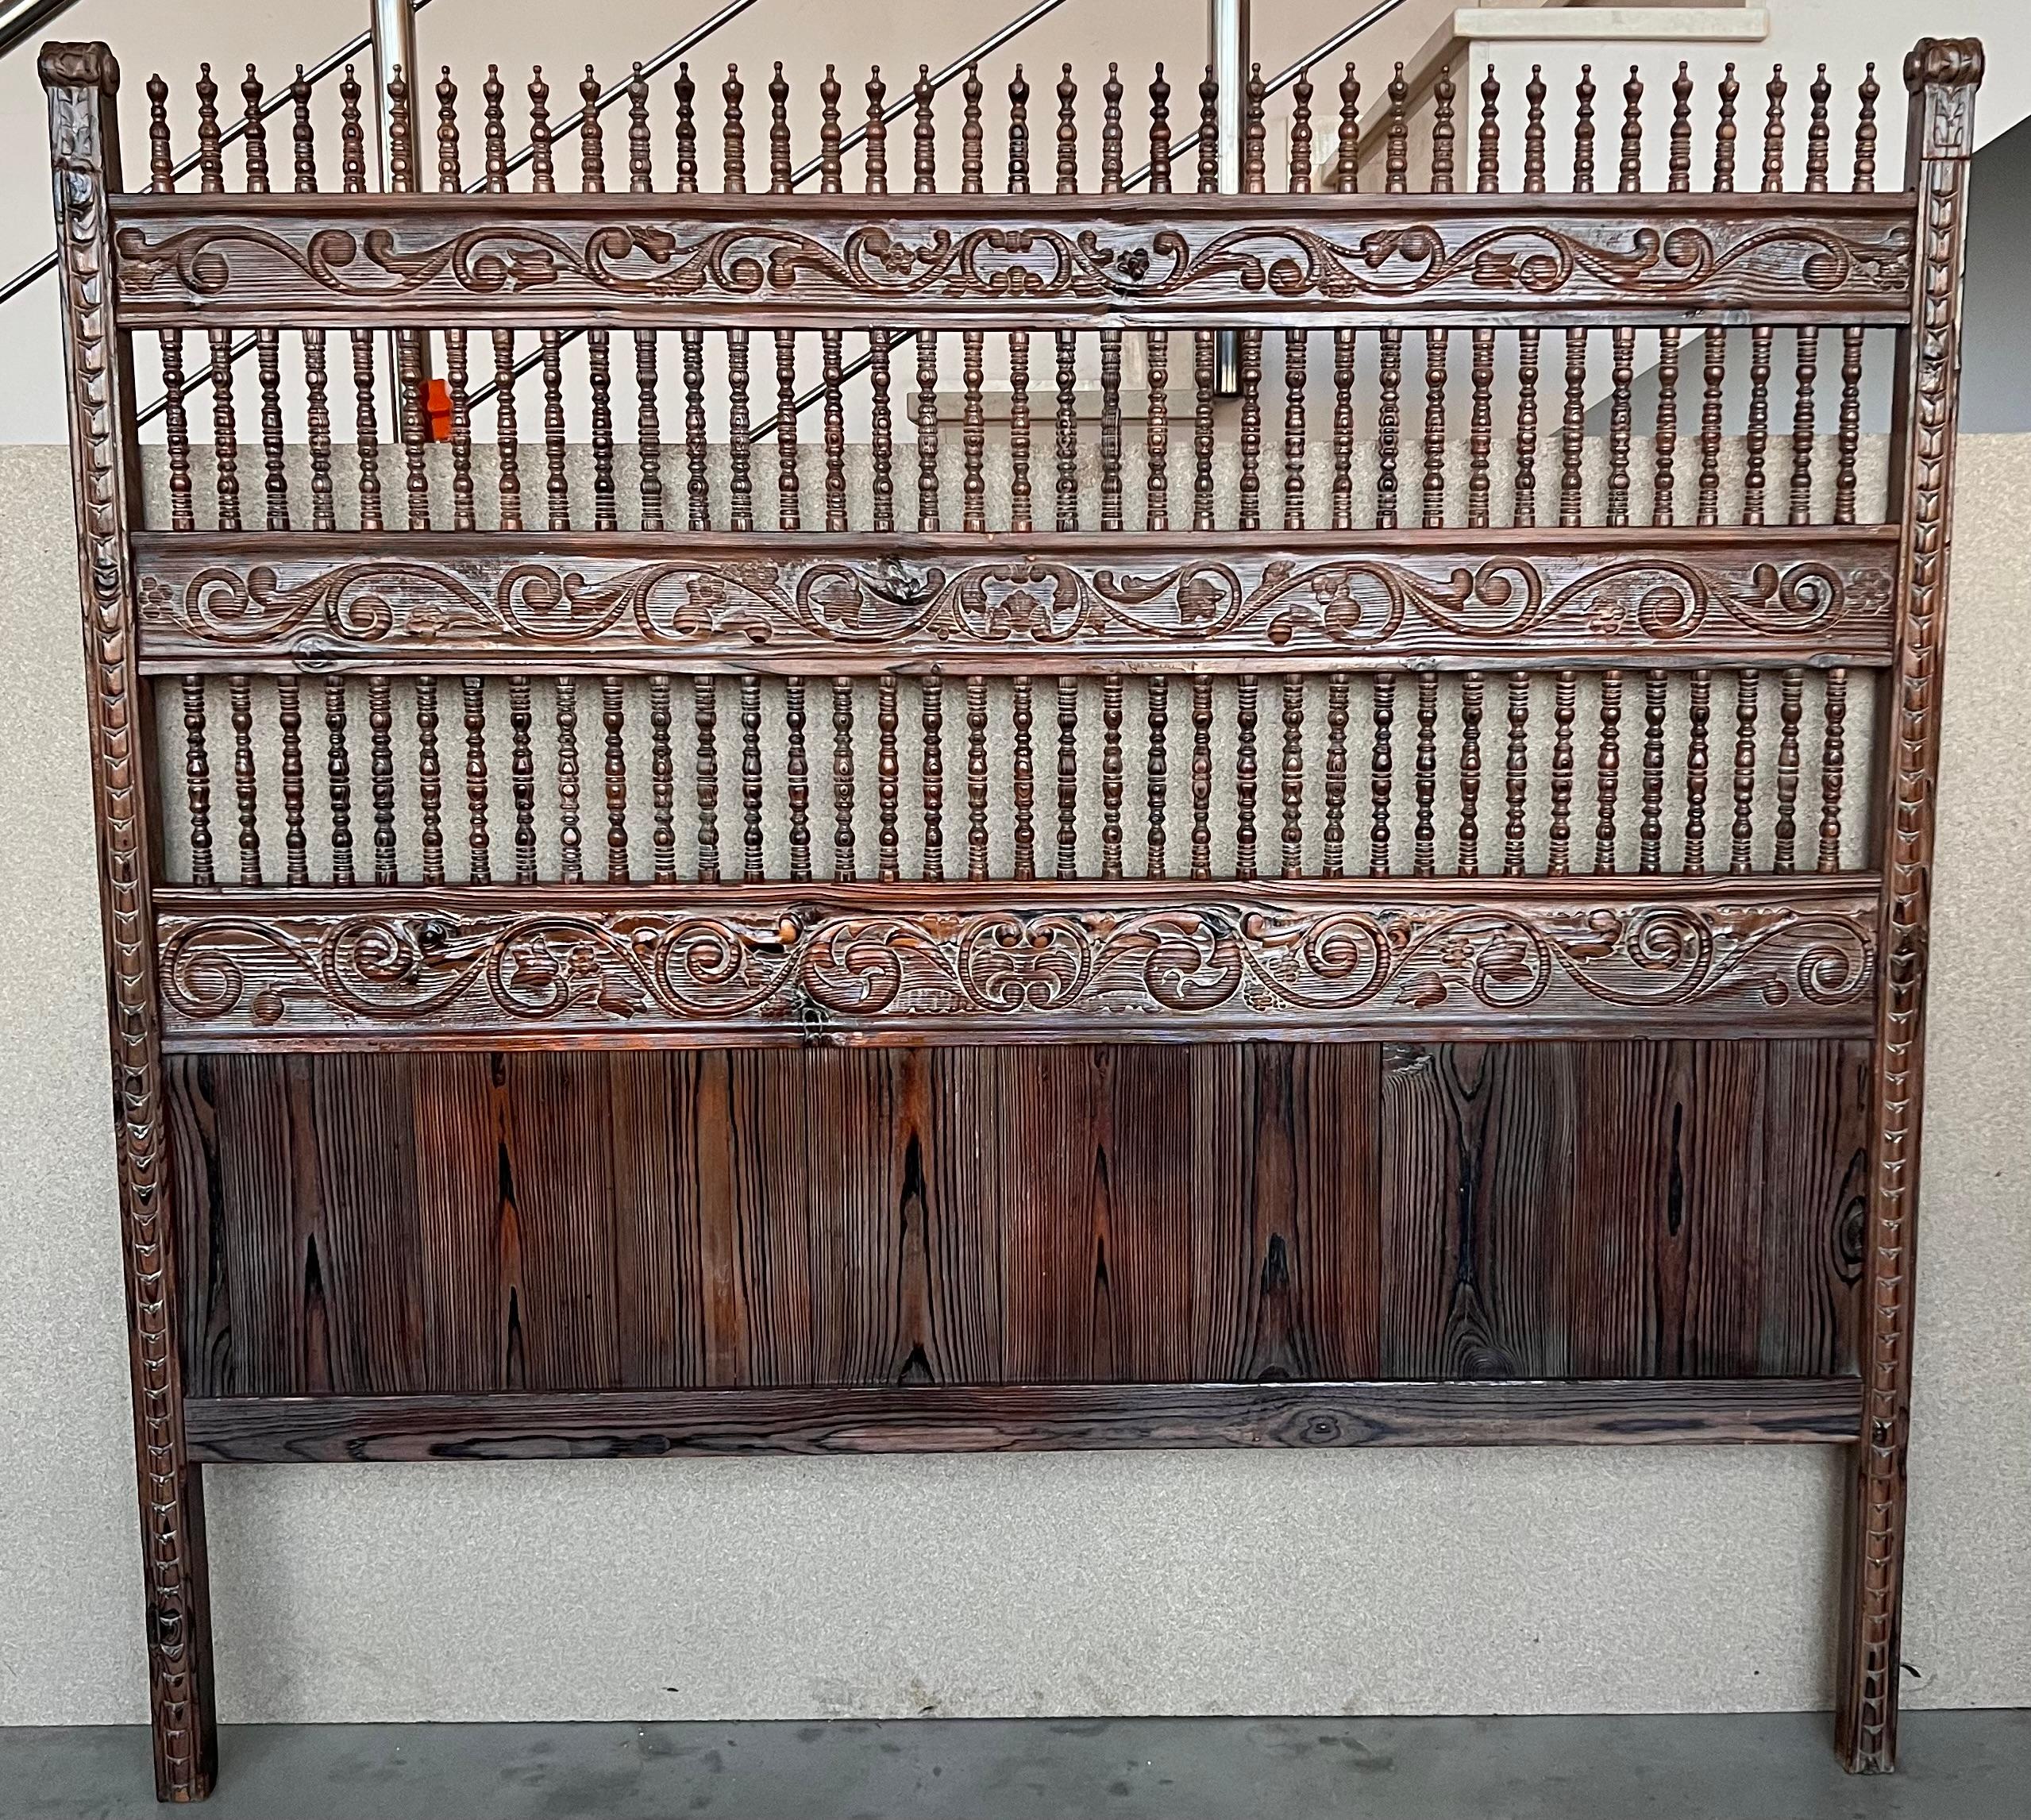 20th Century Baroque style Queen size headboard in carved wood.